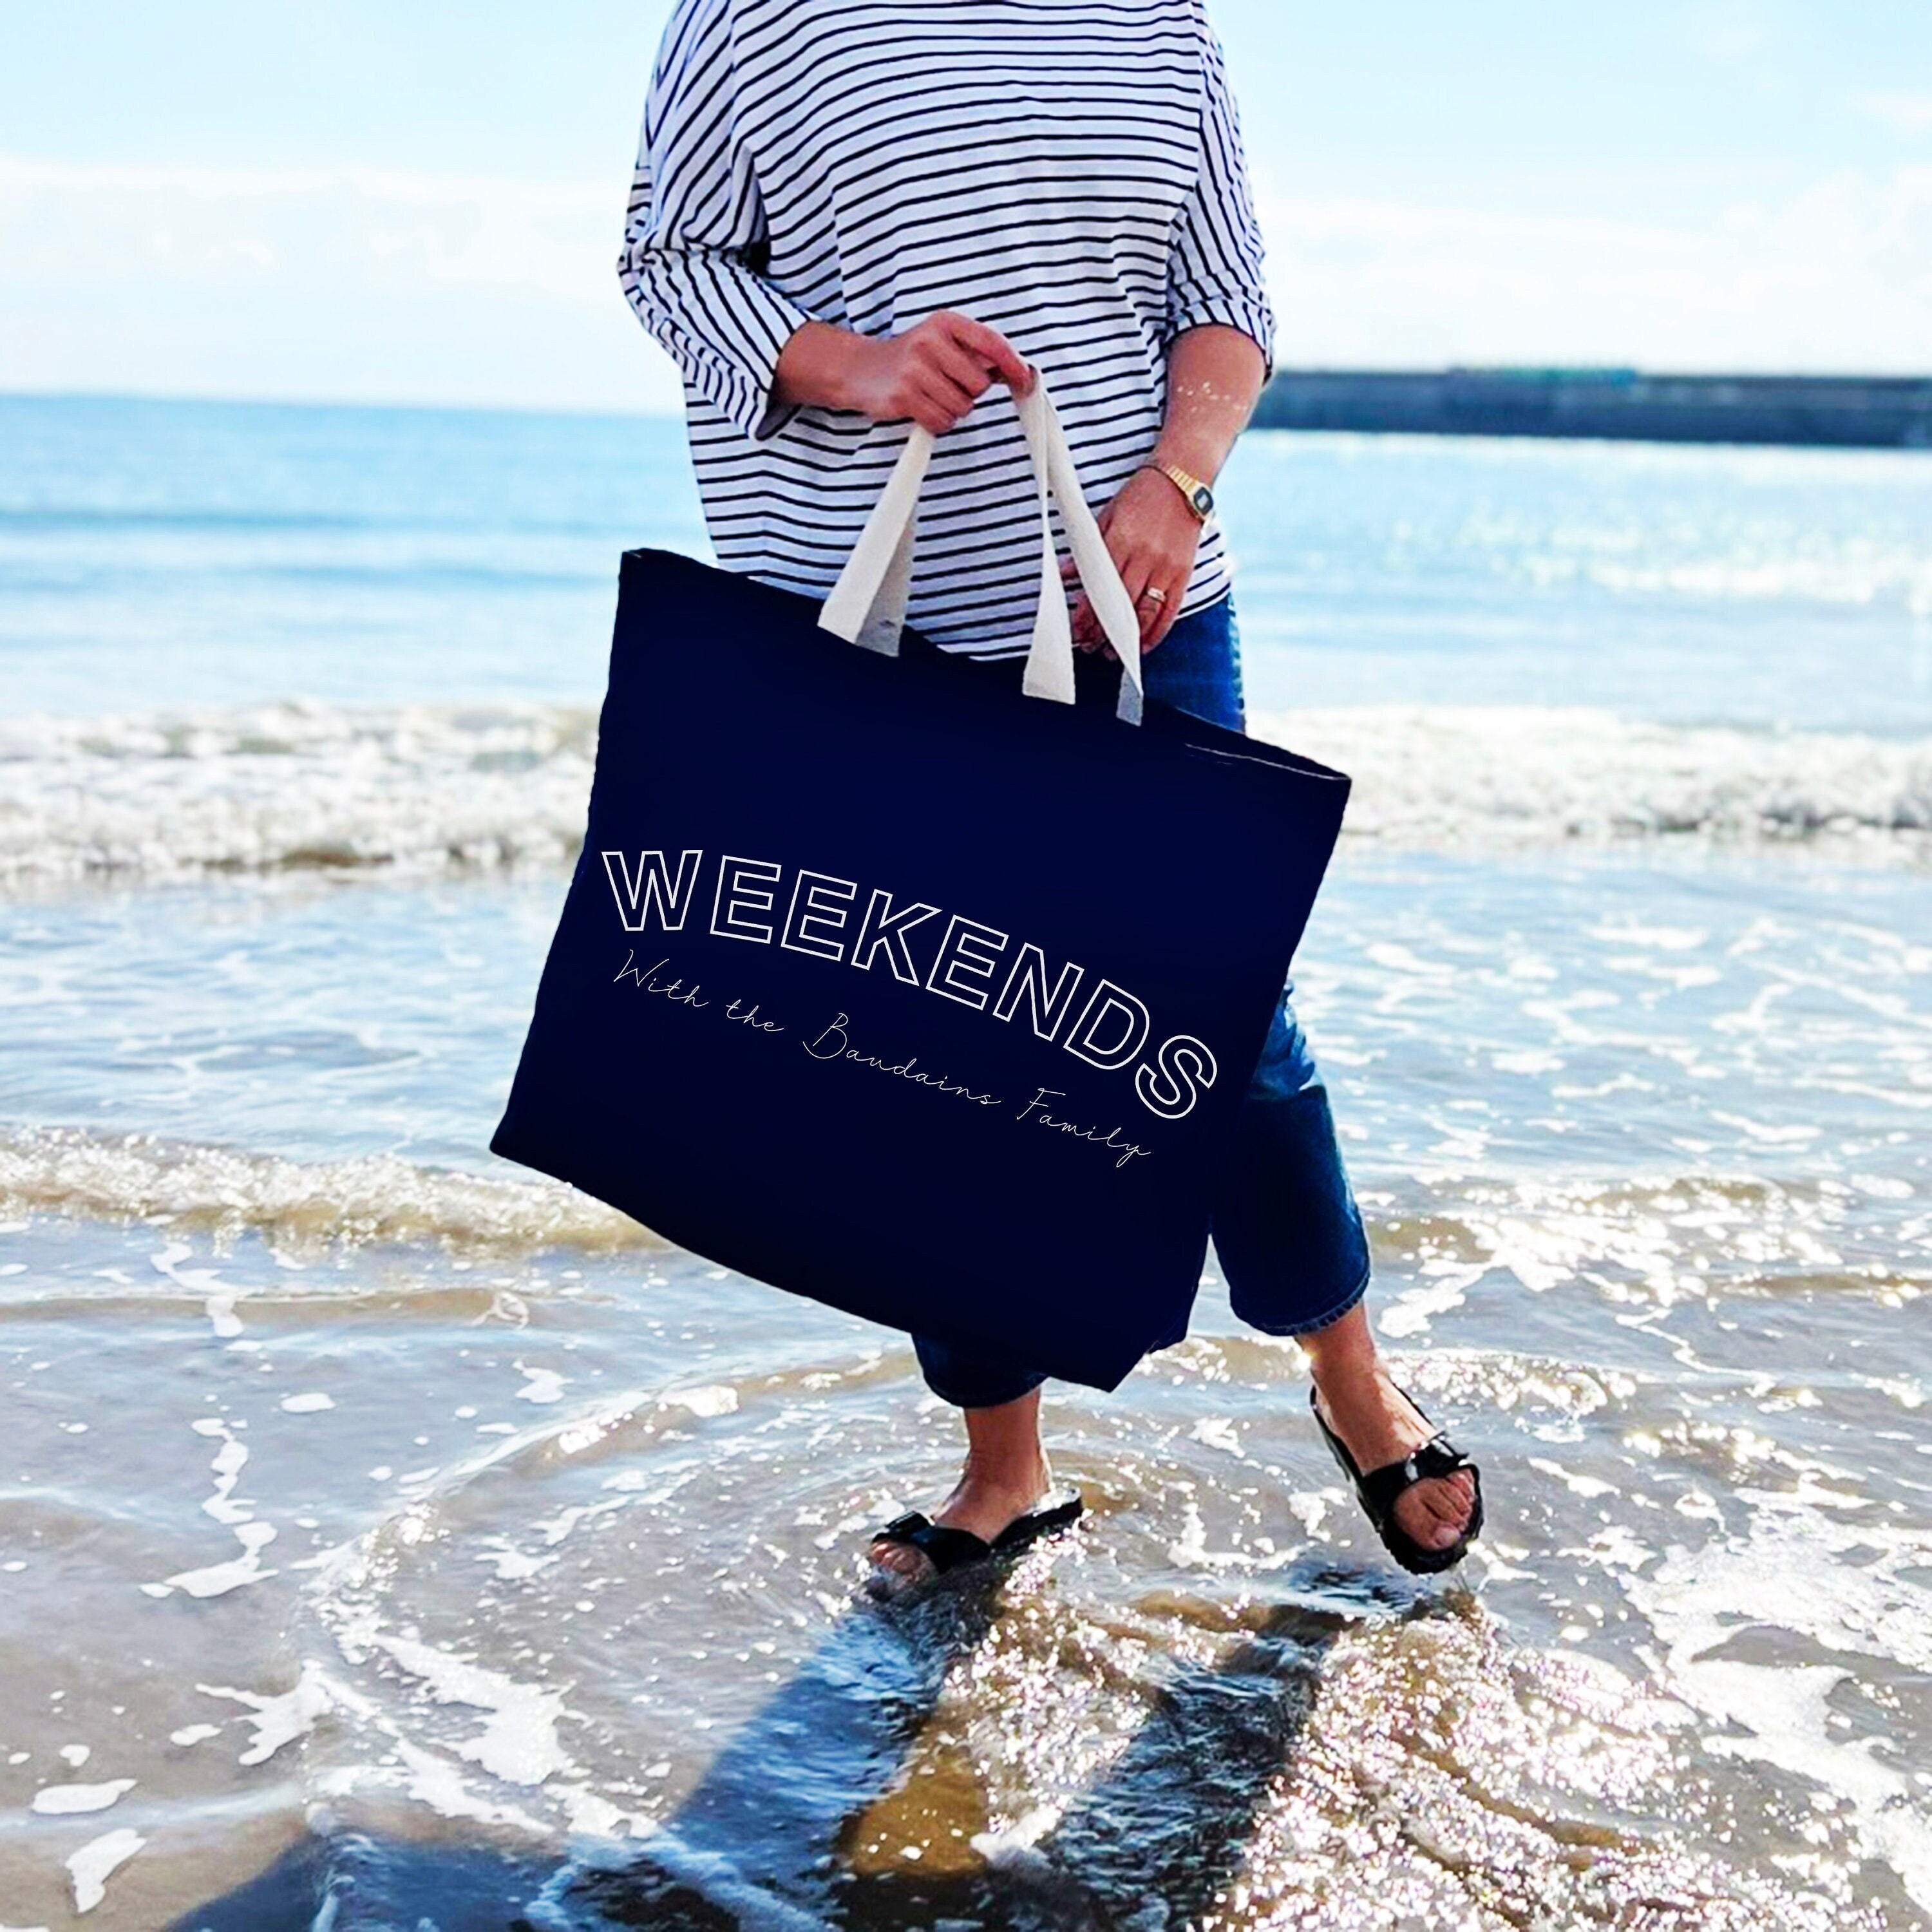 Personalised Weekends Giant Shopping and Beach Bag - Oversized Bag - Shopping - Big Tote- Family Shoulder Bag - Travel holiday - Unisex Gift